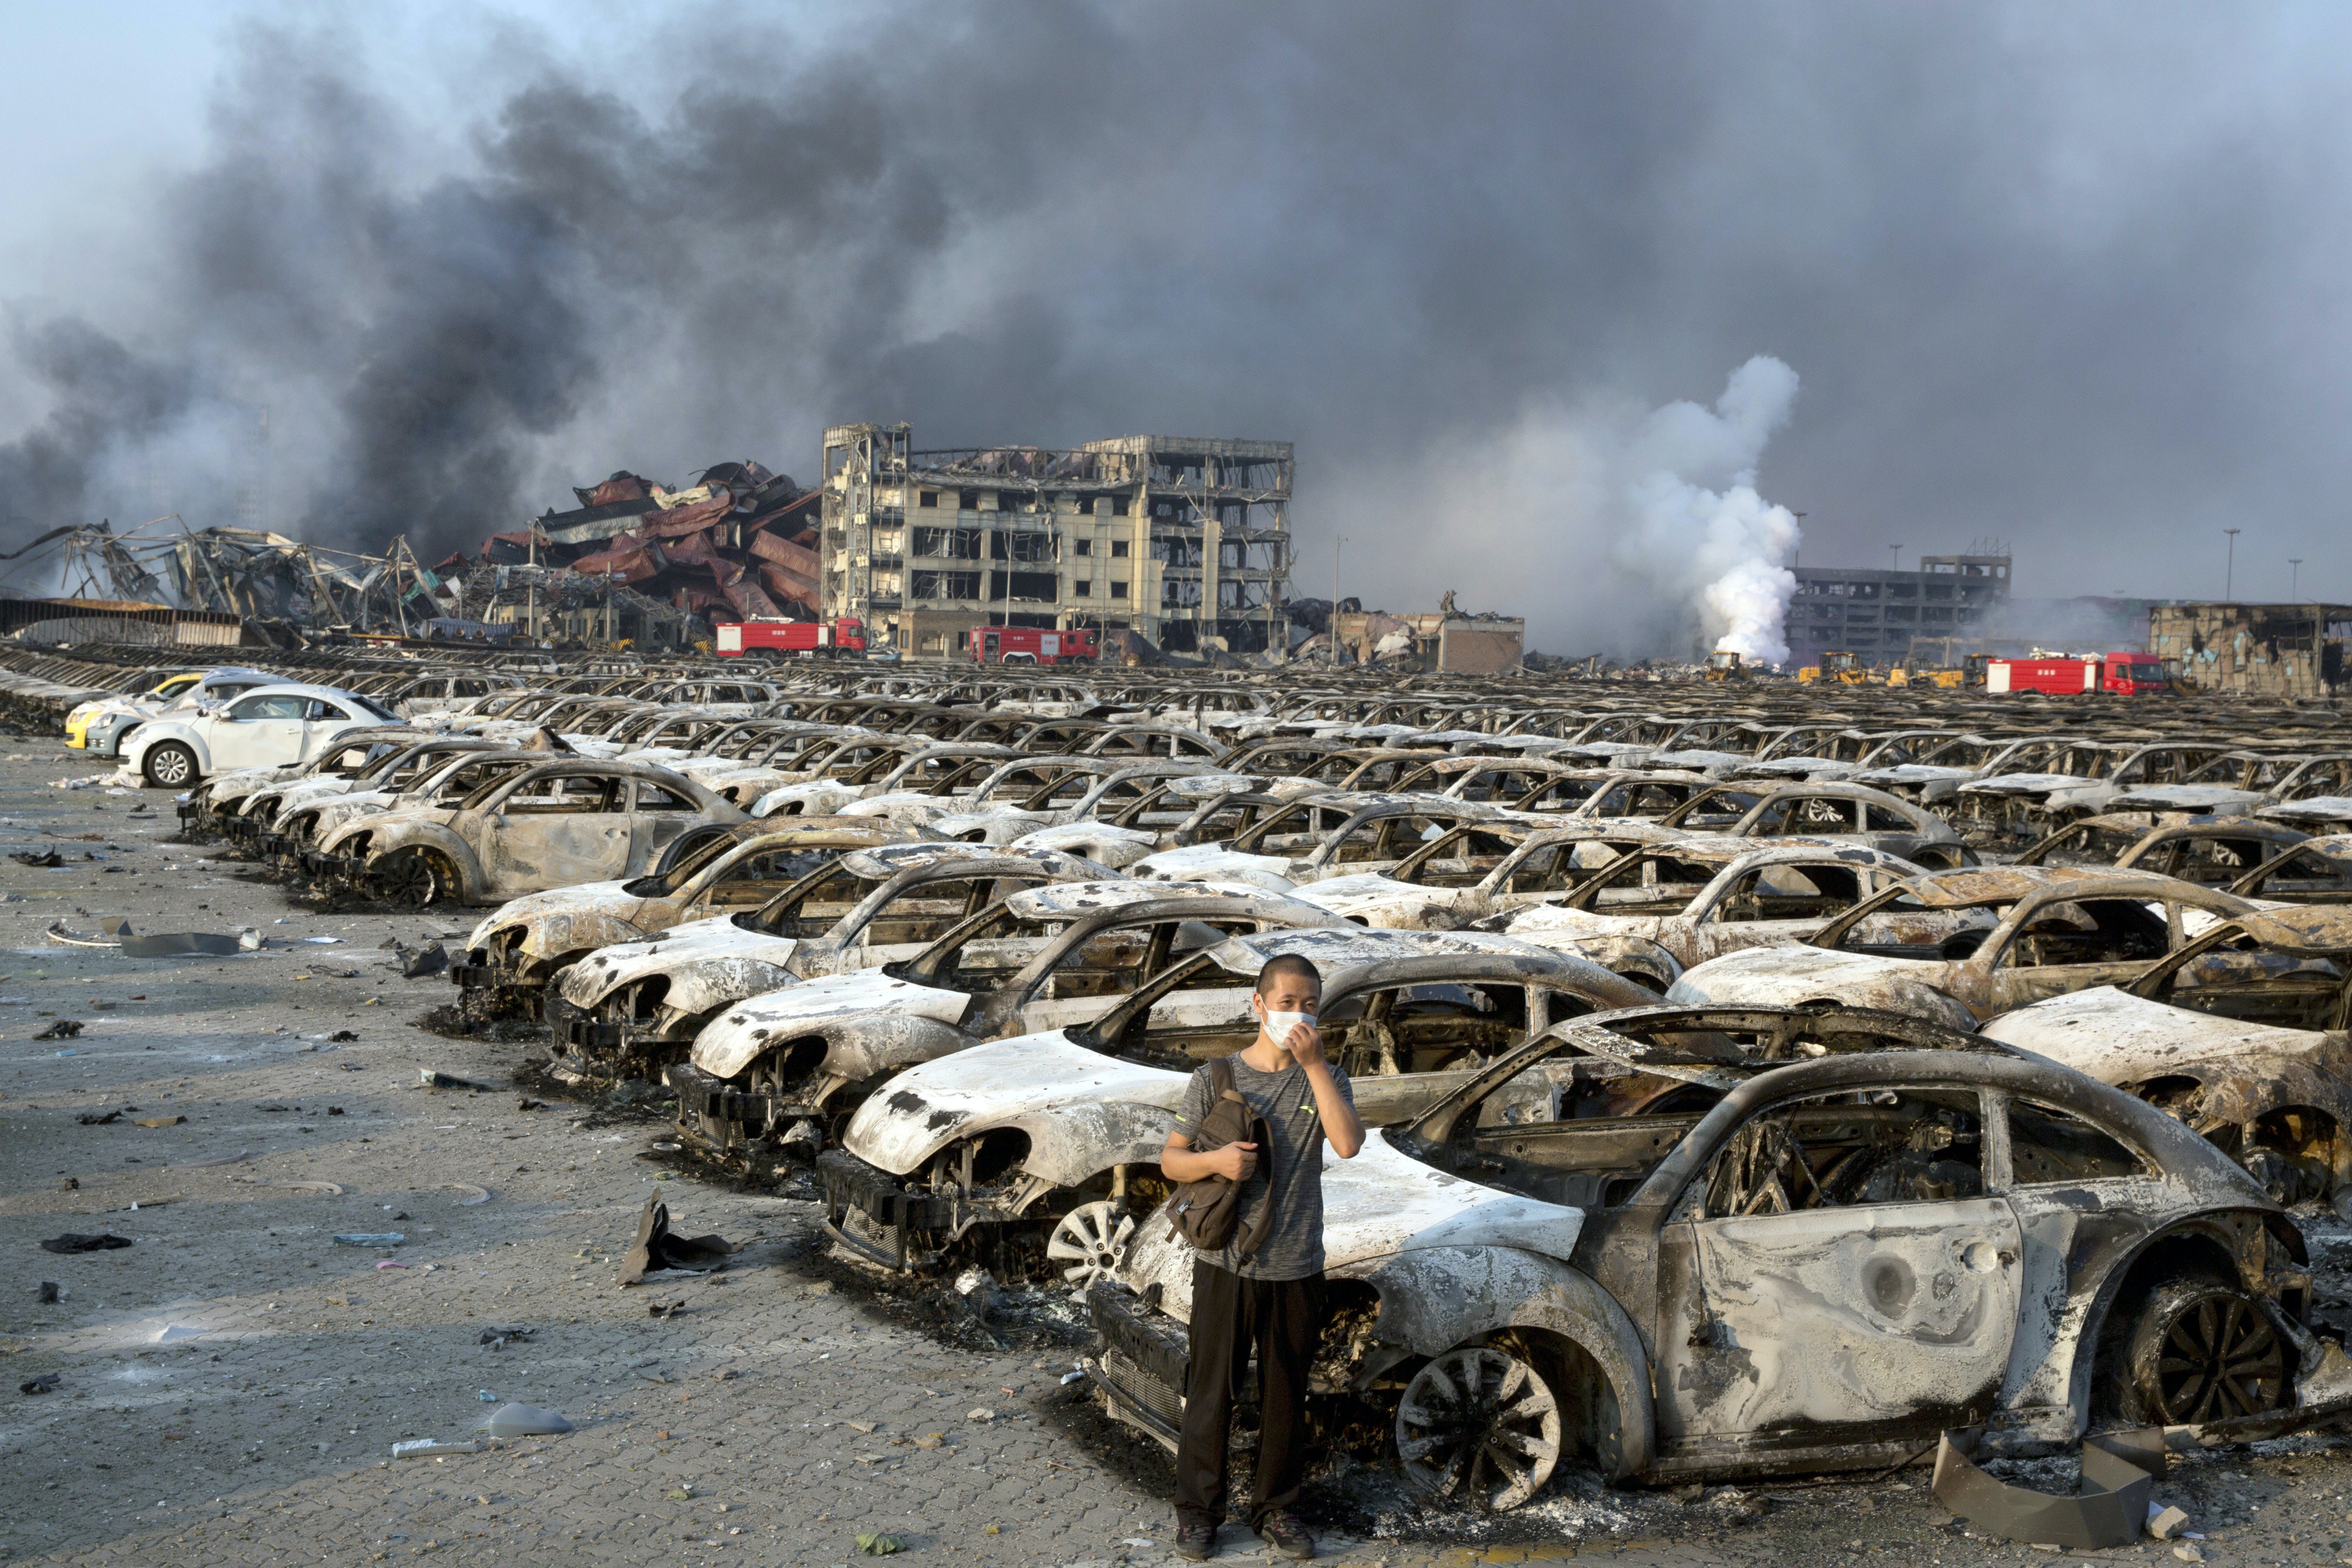 4 Questions Chinese People Want Answered After Deadly Tianjin Blast